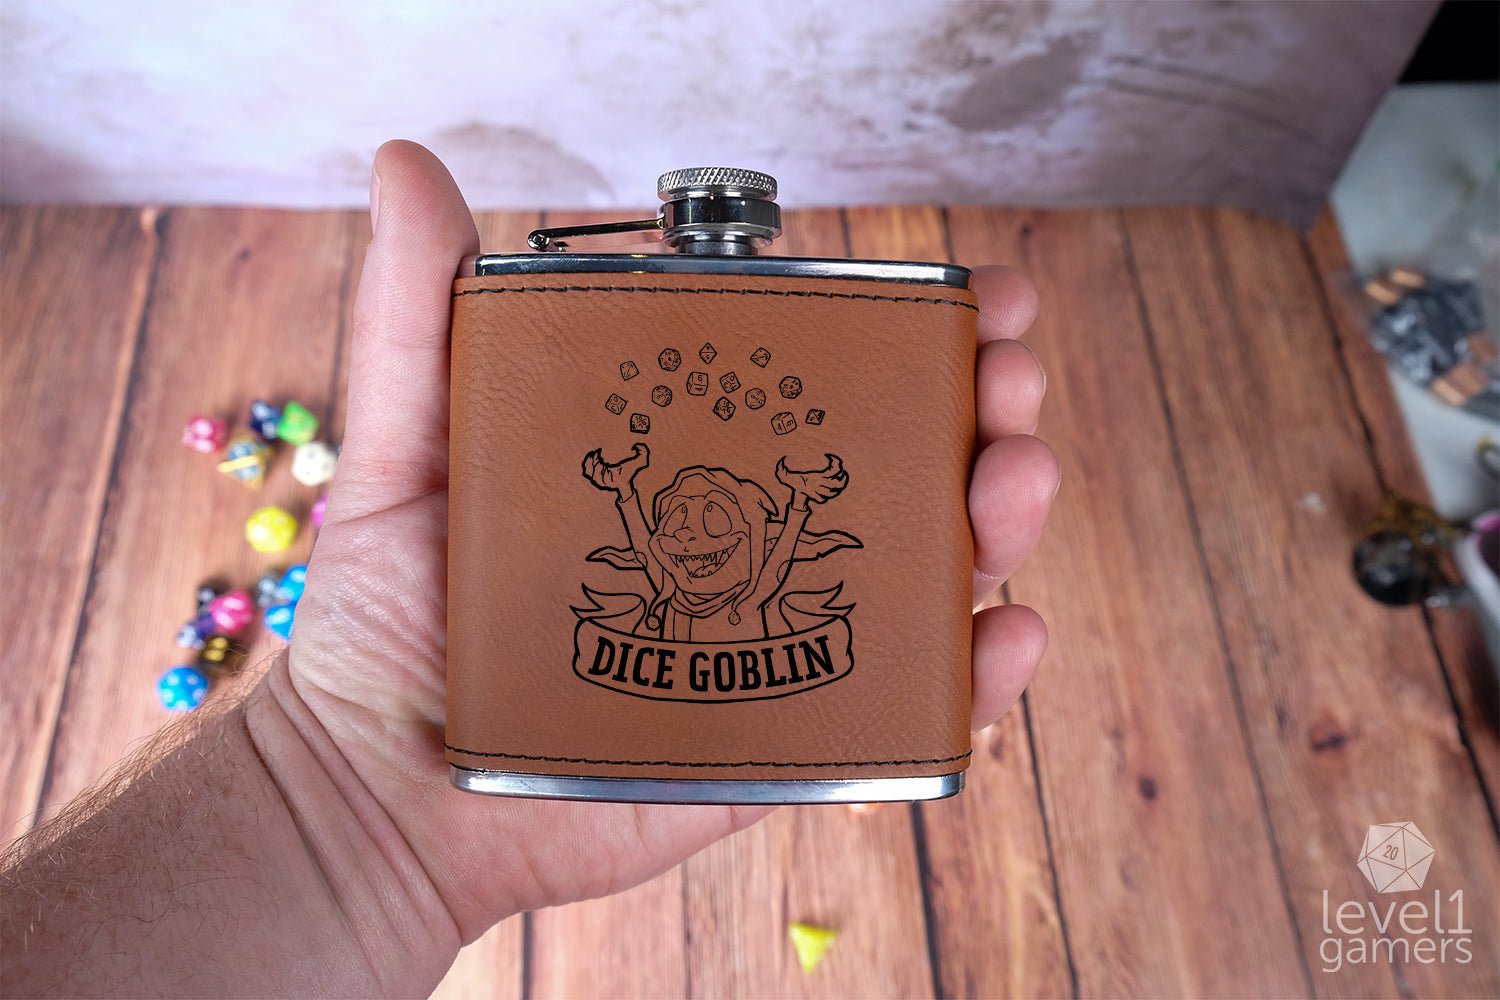 Dice Goblin Flask  Level 1 Gamers   